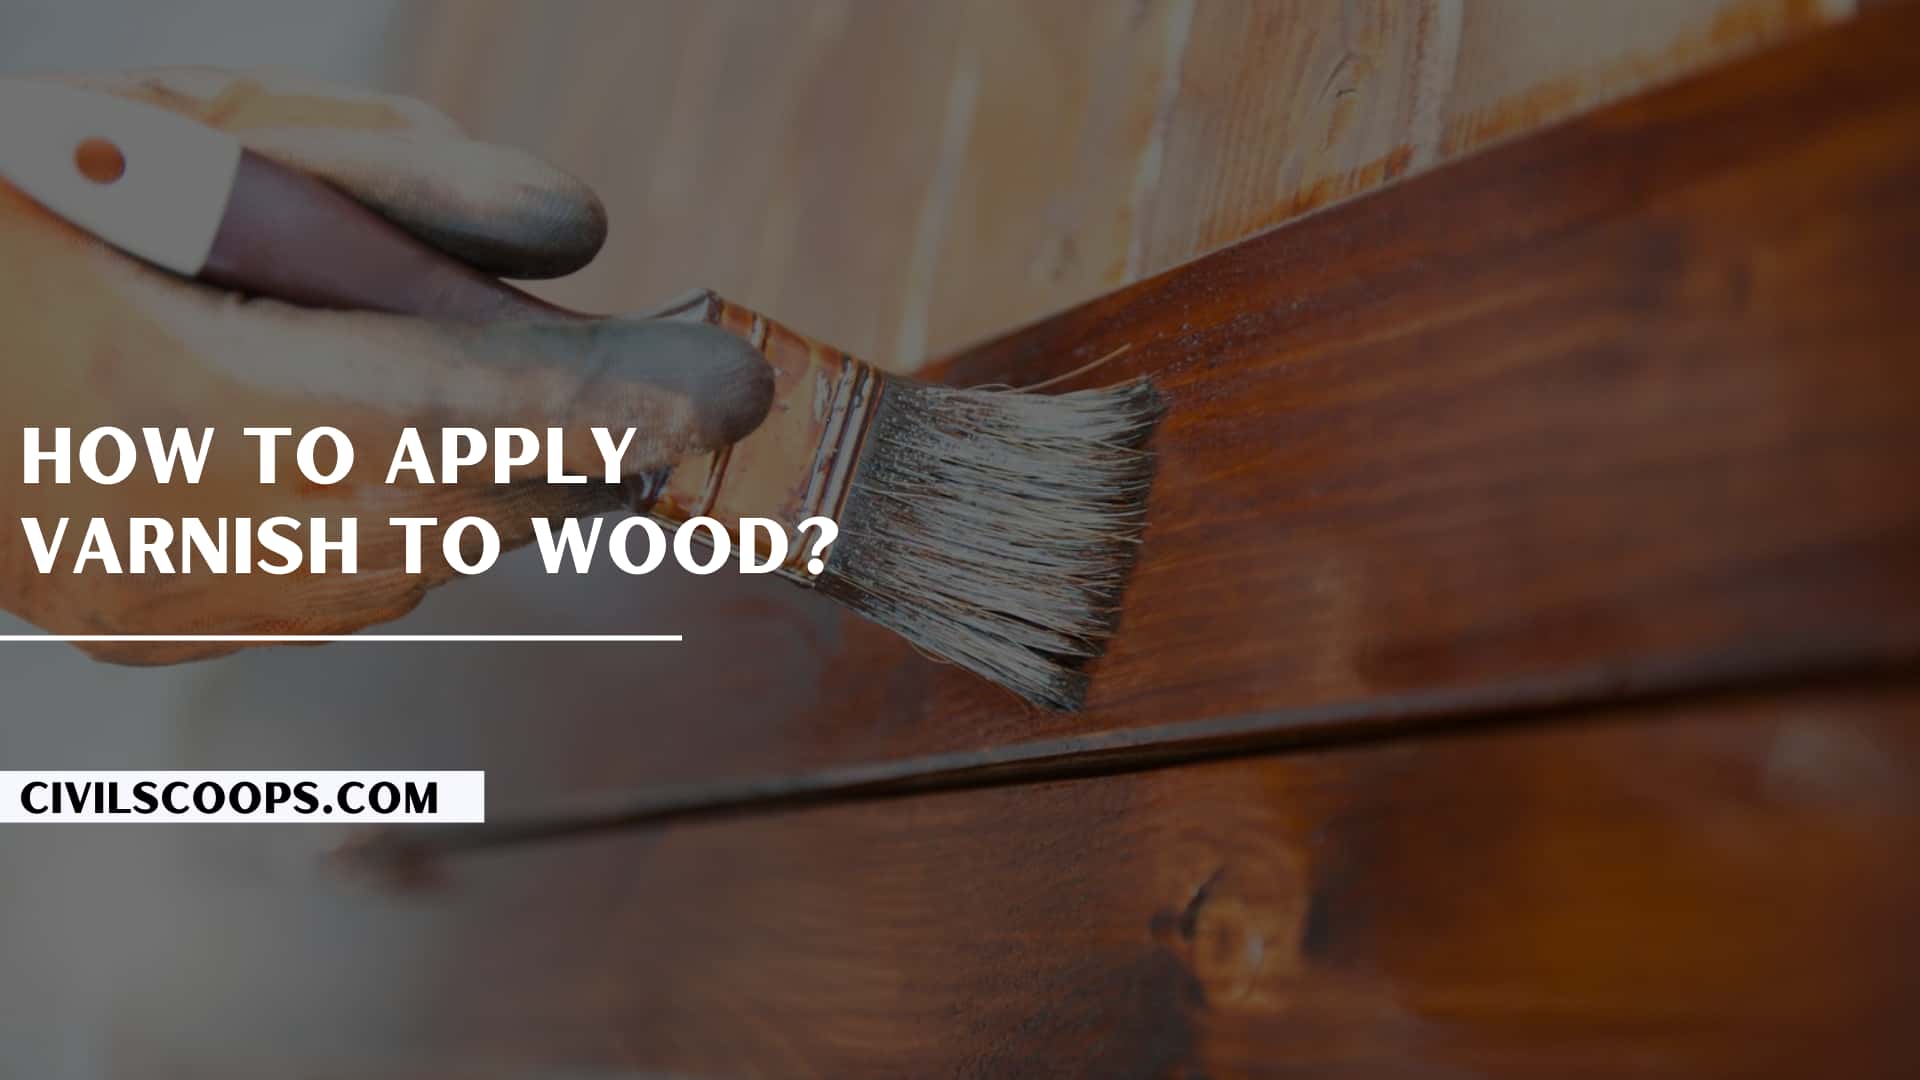 How to Apply Varnish to Wood